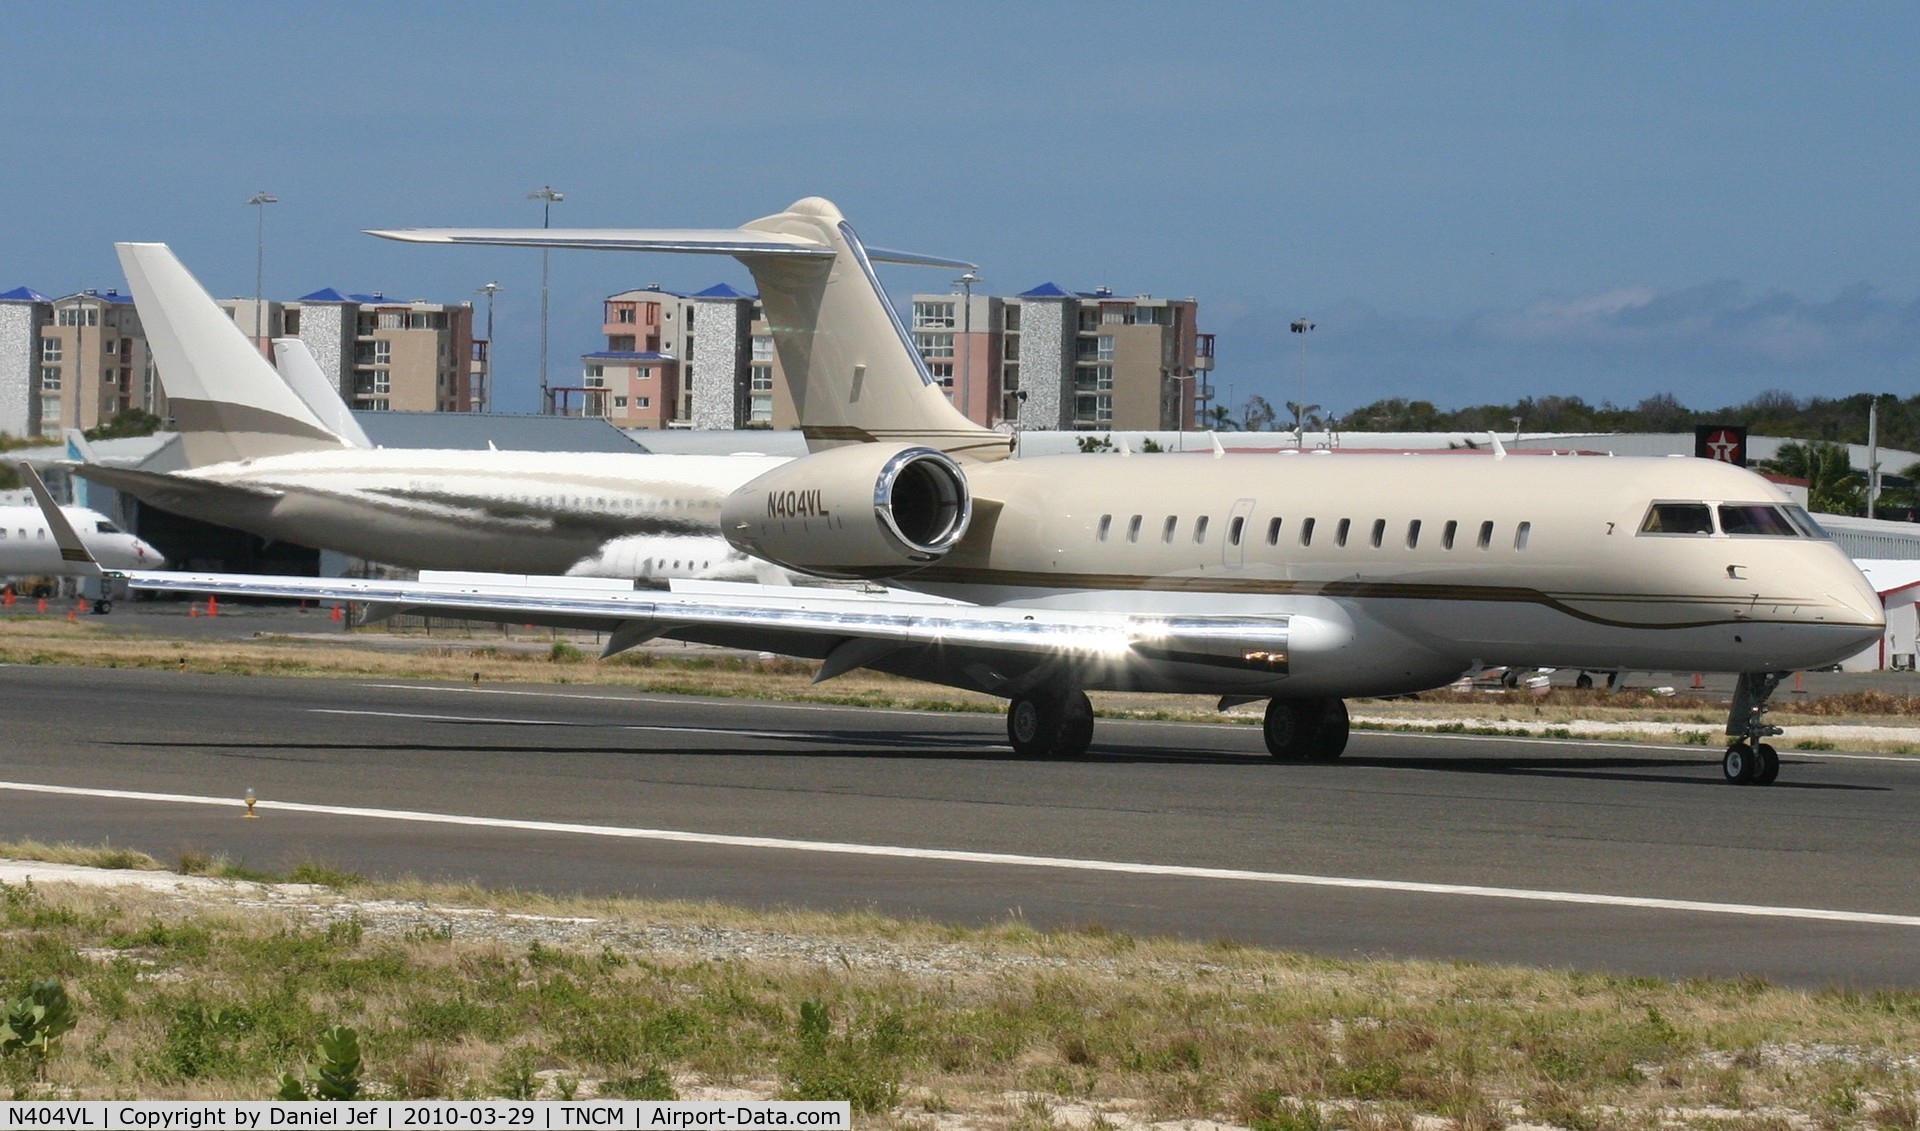 N404VL, 2001 Bombardier BD-700-1A11 Global Express C/N 9085, N404VL just landed at TNCM and rolling out to a stop